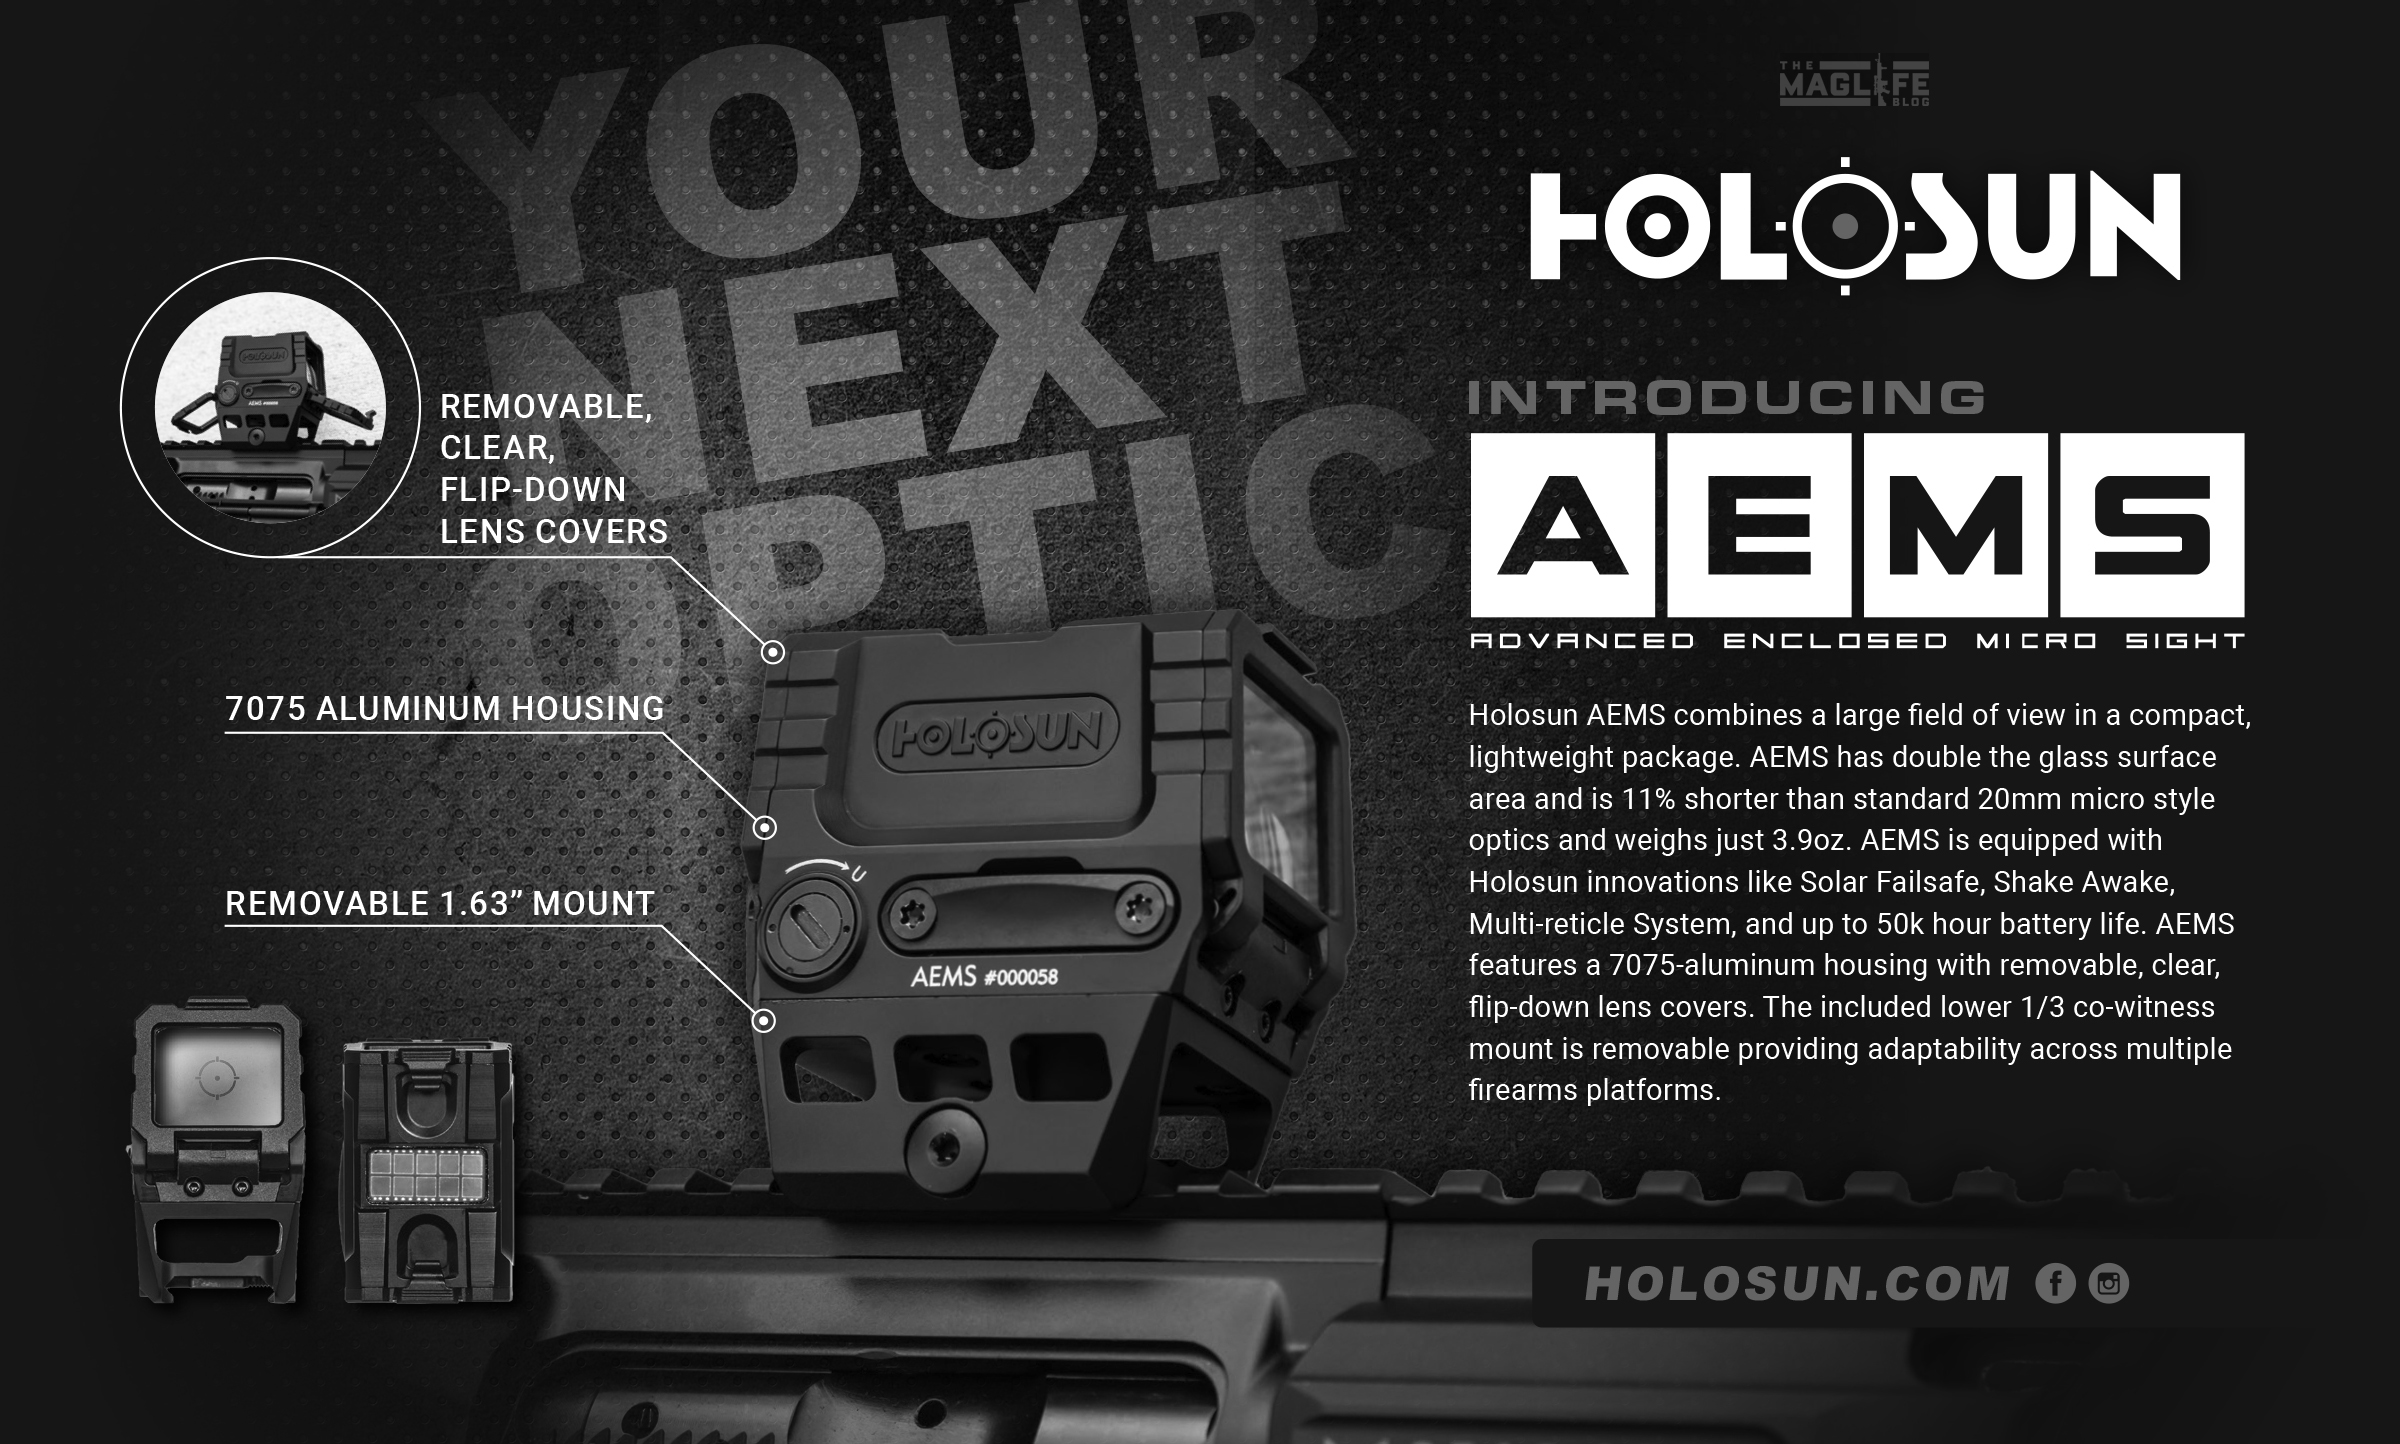 An initial look at the features of the Holosun AEMS Advanced Enclosed Micro Sight. 